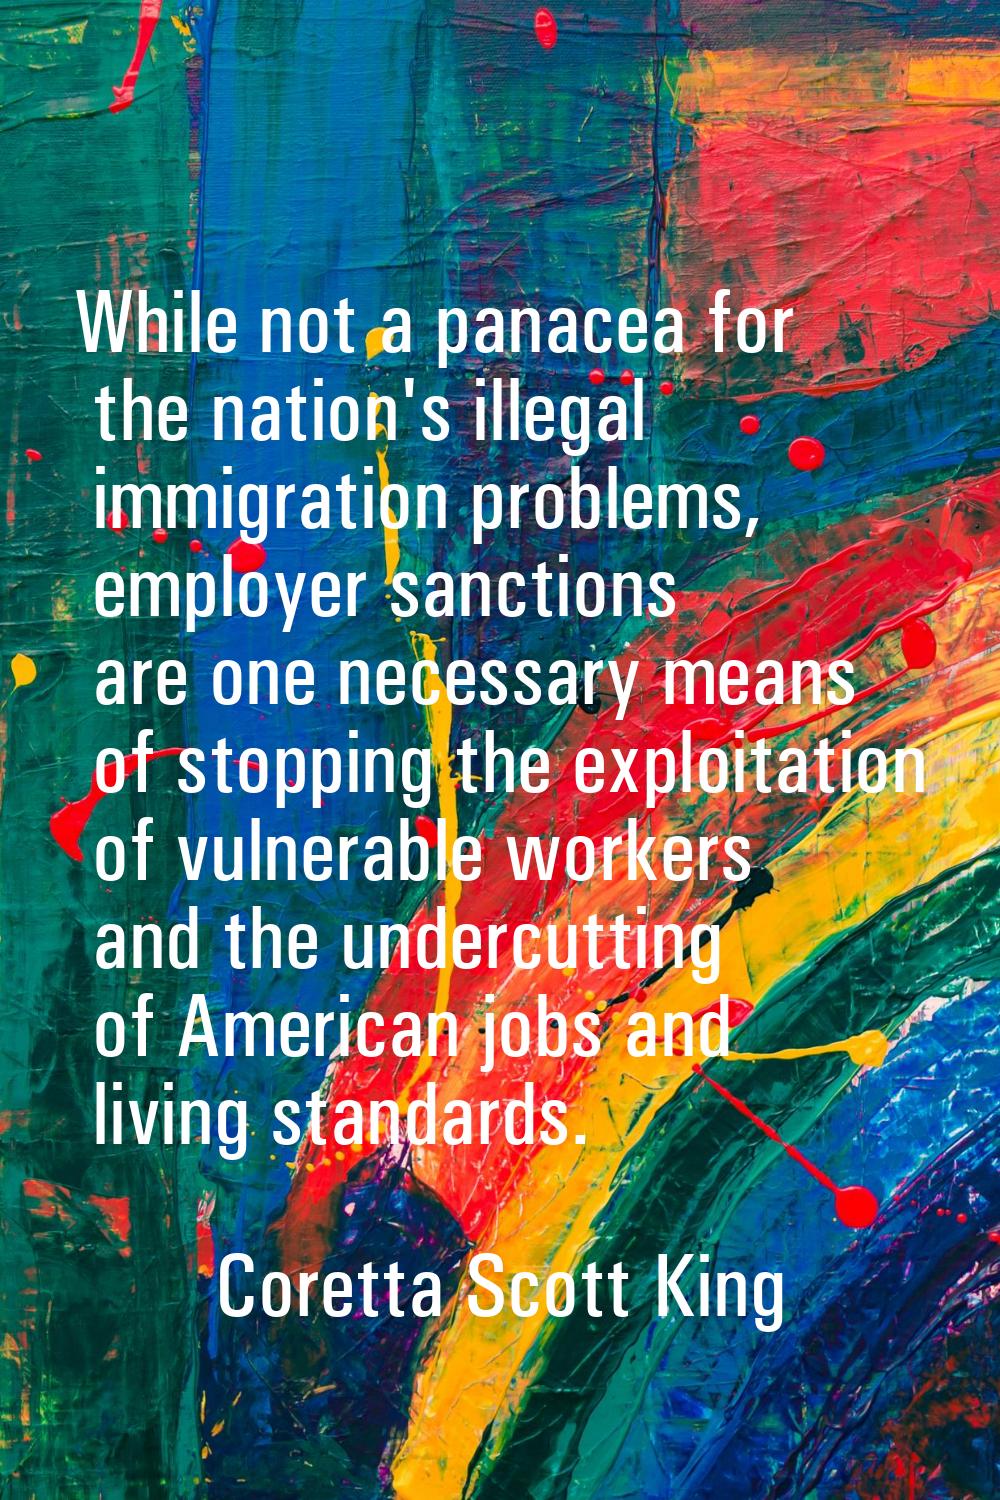 While not a panacea for the nation's illegal immigration problems, employer sanctions are one neces